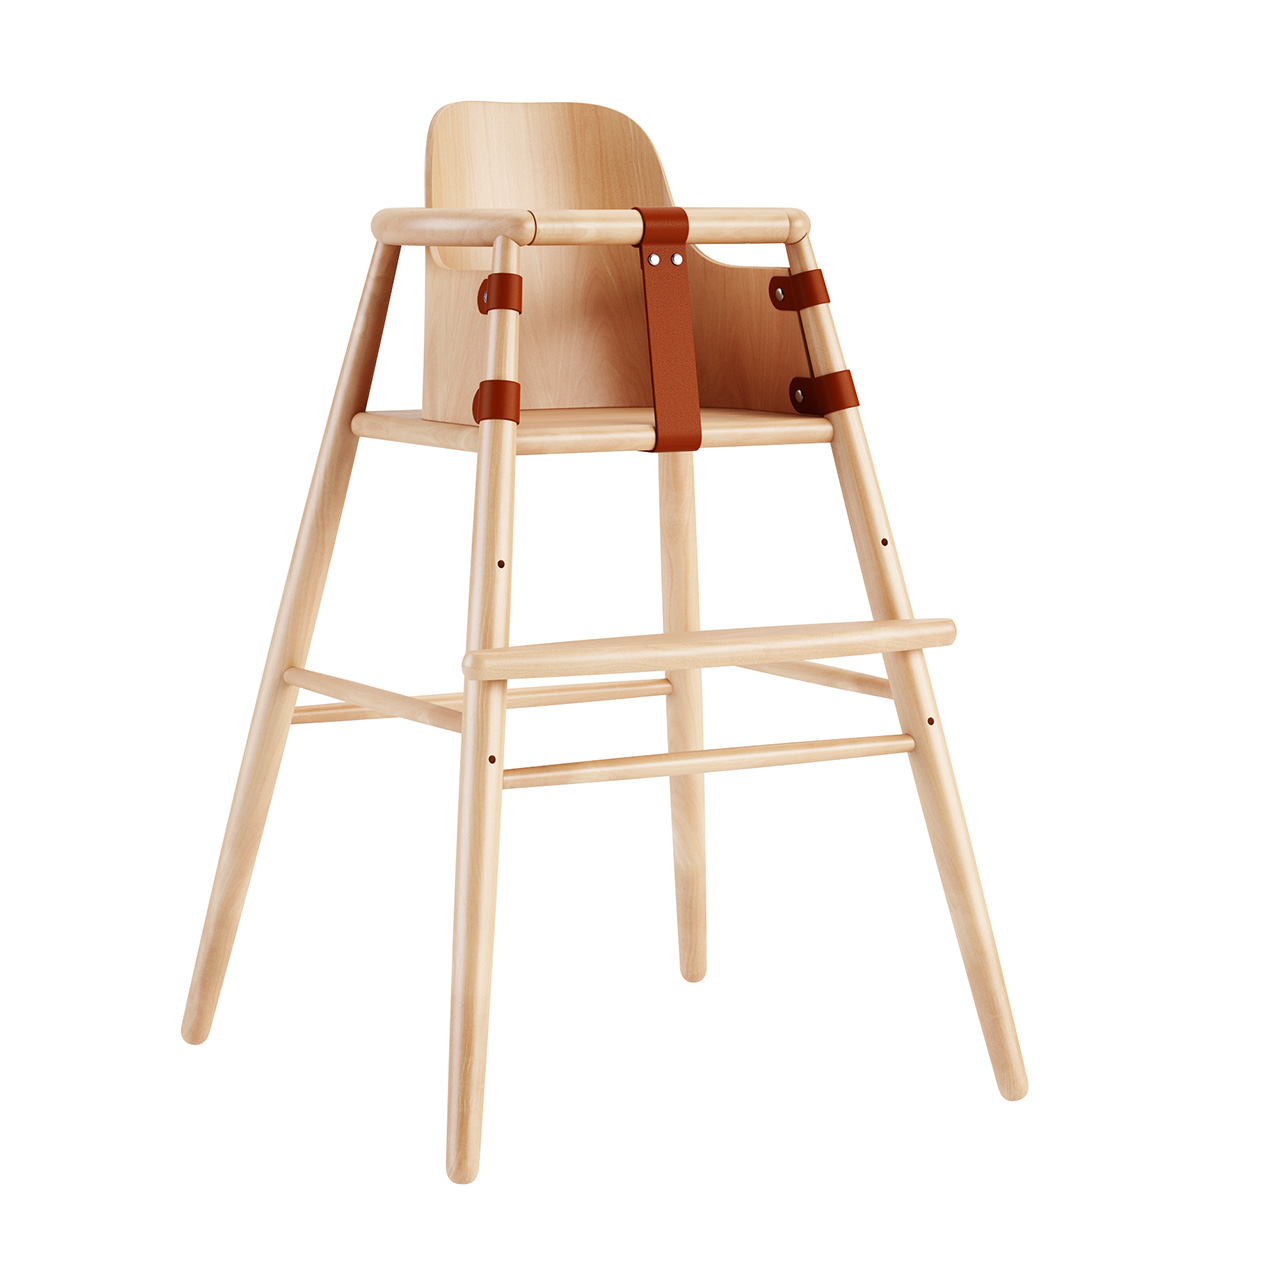 nd54-high-chair-baby-seat-with-backrest-by-carl-hansen.jpg